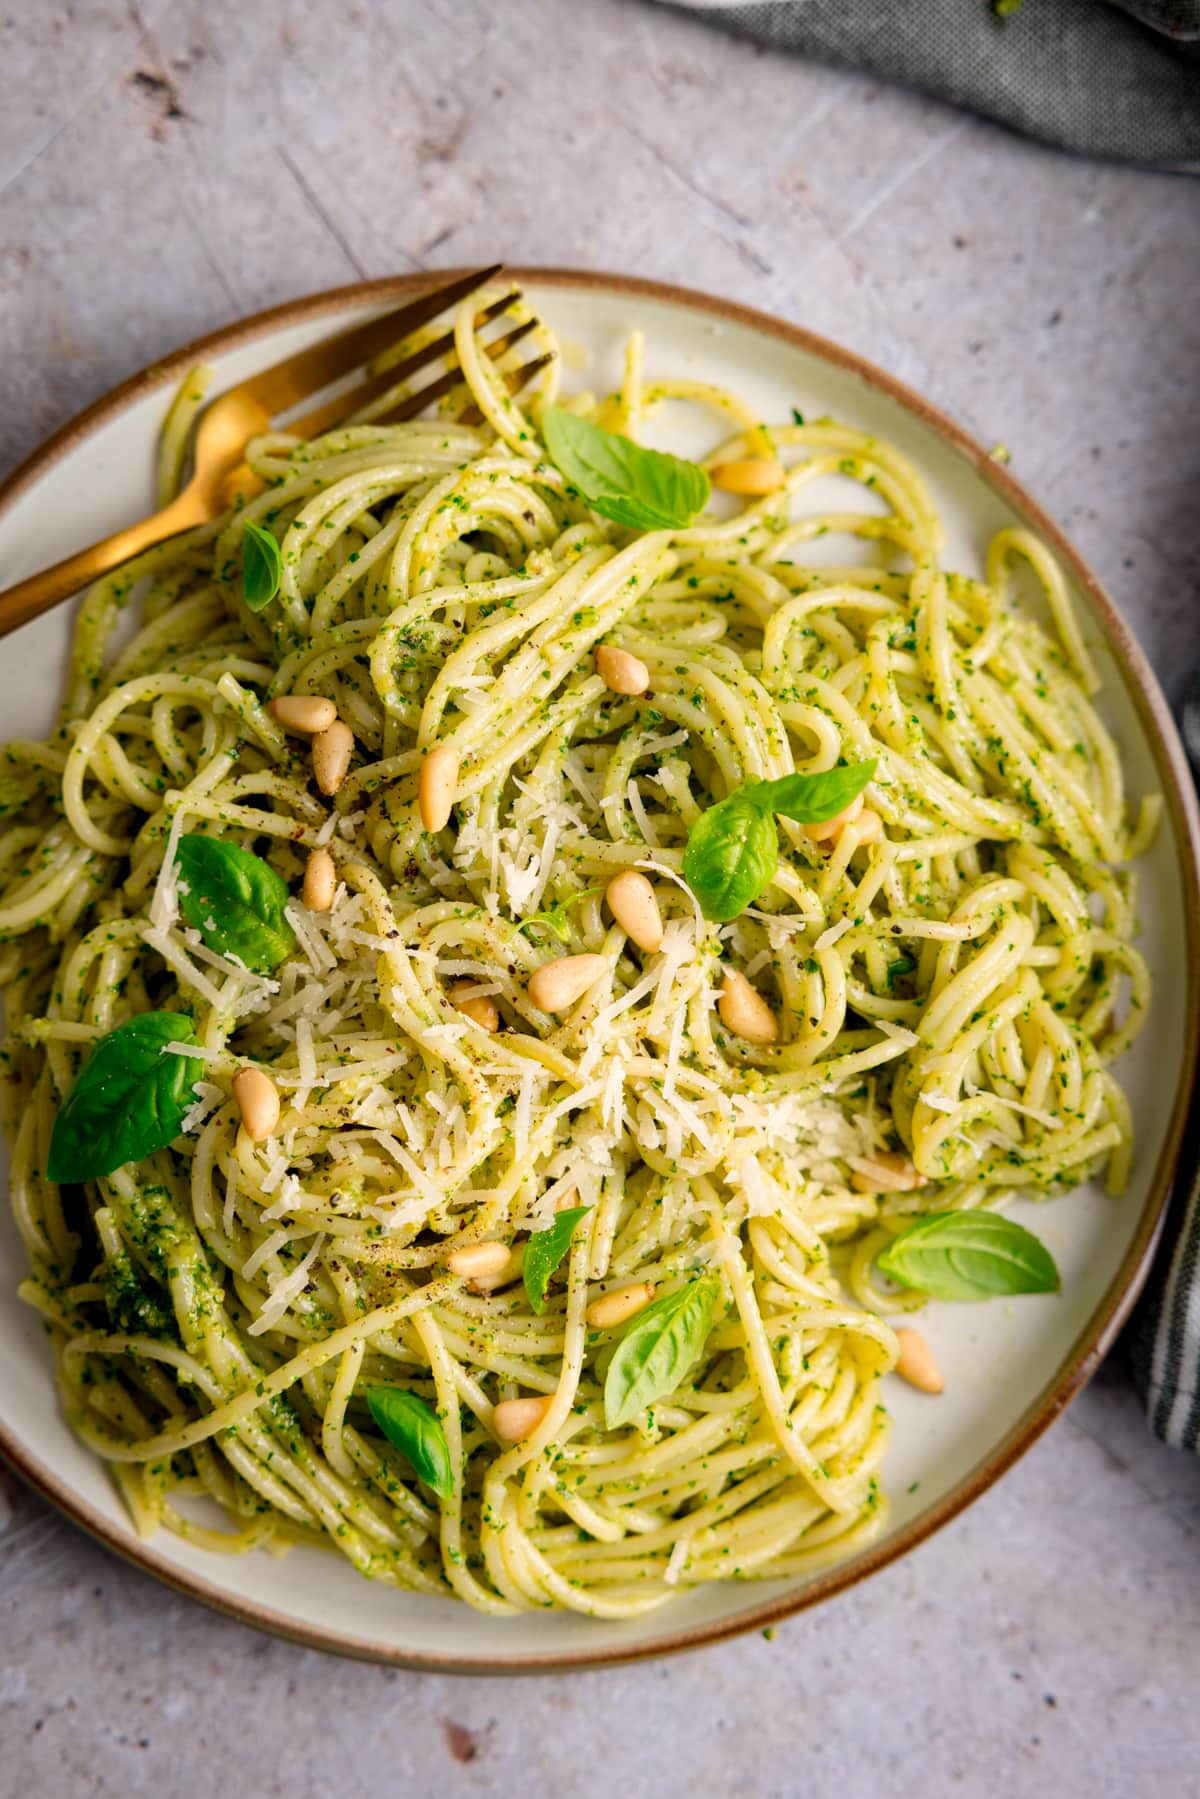 Overhead image of pesto spaghetti on a light grey plate. The pasta is sprinkled with baby basil leaves, toasted pine nuts and parmesan. The plate is on a light grey surface and there is a gold fork on the plate.